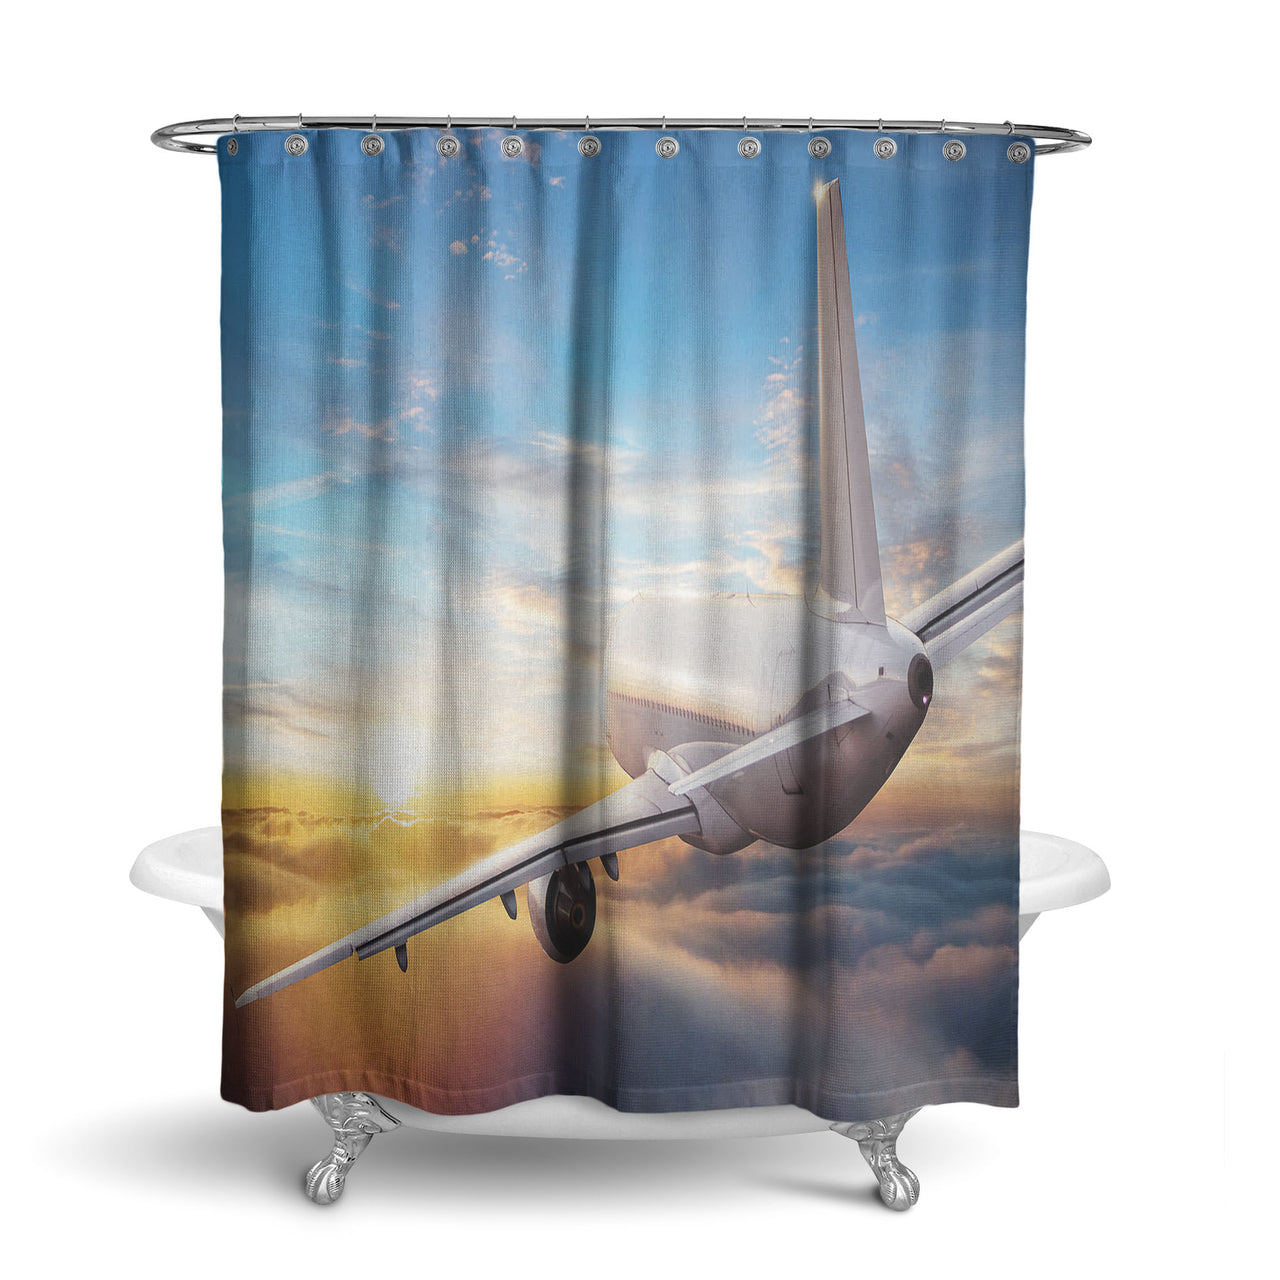 Airliner Jet Cruising over Clouds Designed Shower Curtains